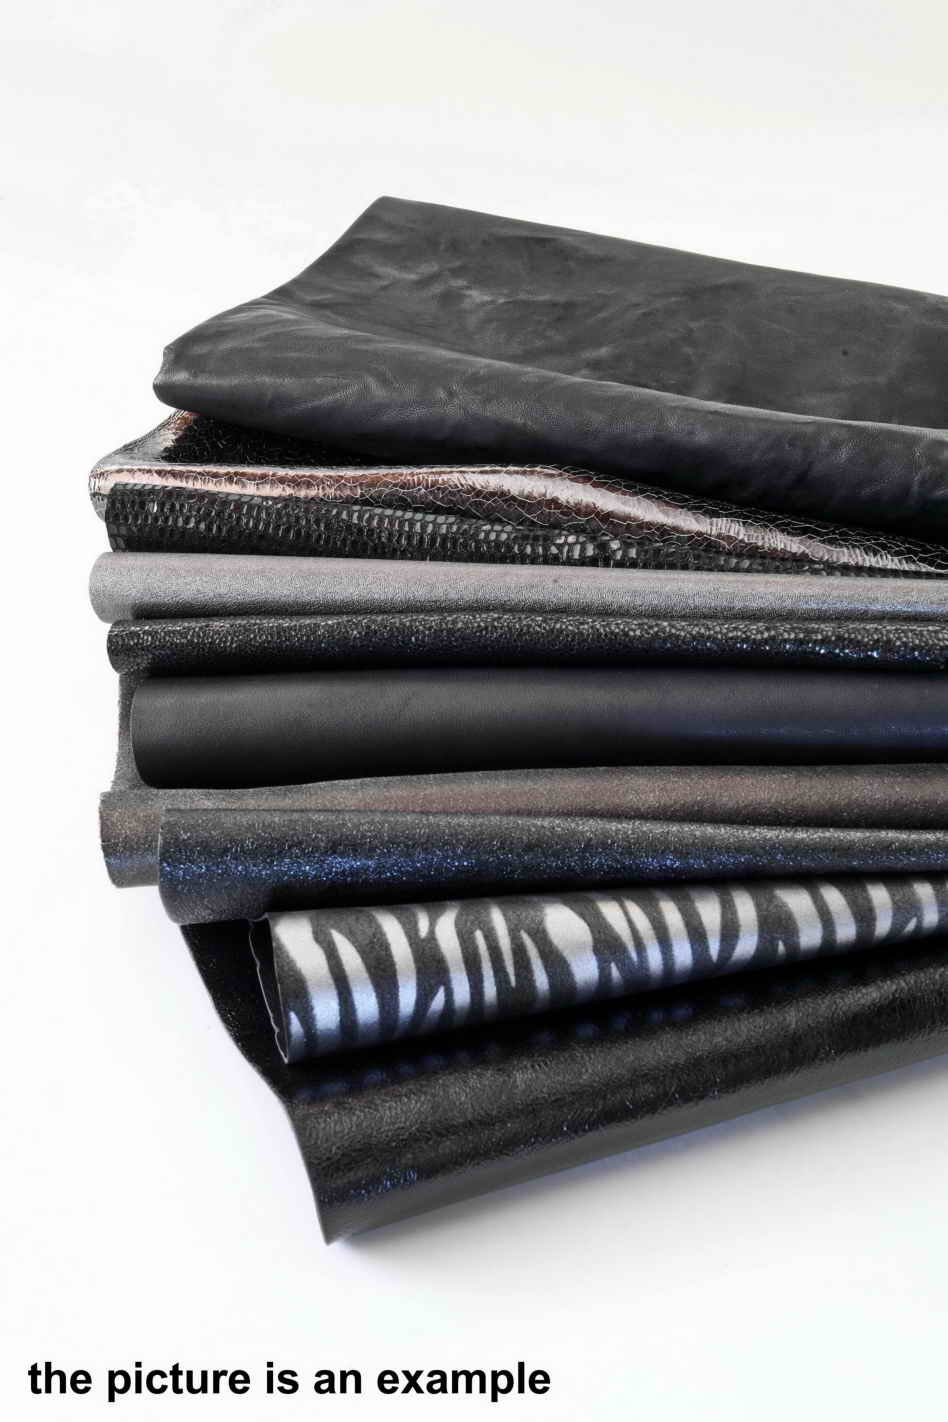 Mix leather scraps - BLUE and GREY - fancy textures, prints and softness  various, 10 or 15 italian